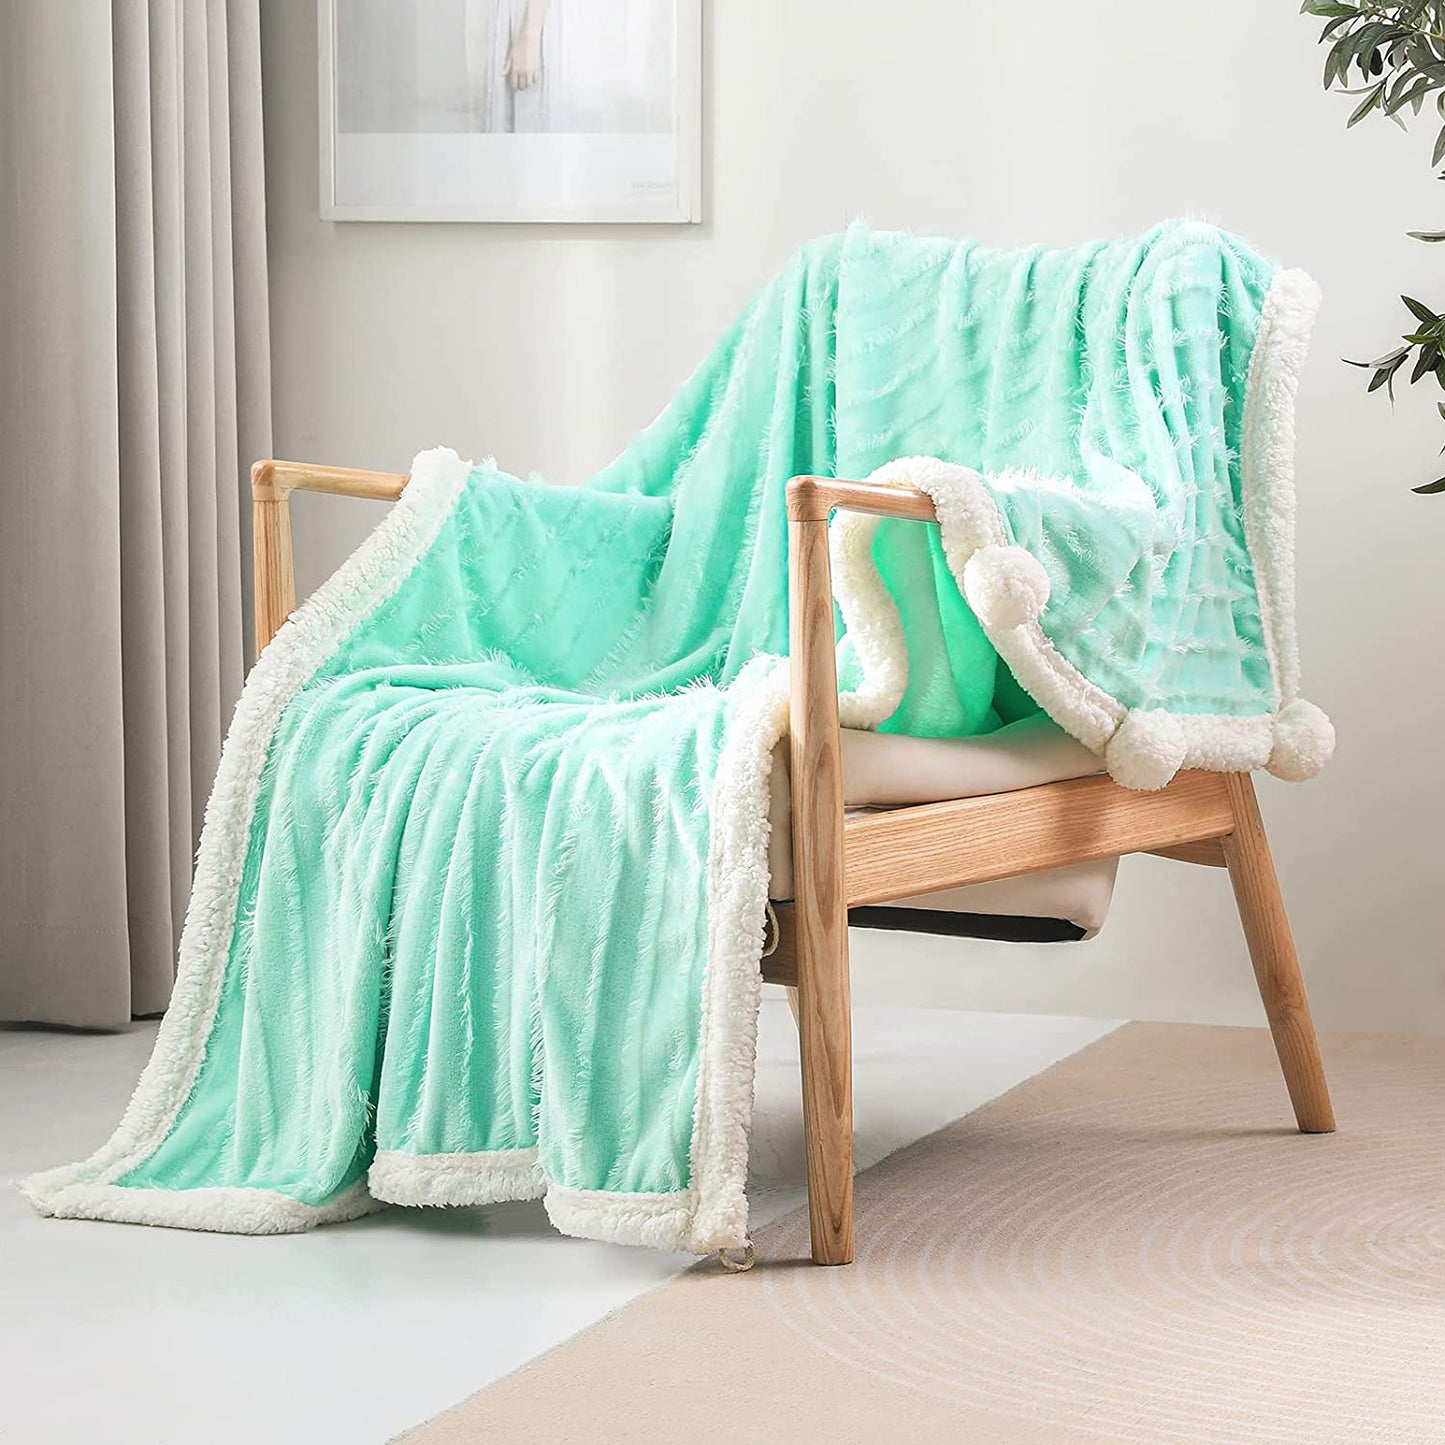 Exclusivo Mezcla Wearable Throw Blanket Soft Wrap Throw Cloak Blanket Poncho Ultra Soft Cozy Oversize Blanket Warm for Winter ( 50x72 Inches, Light Green)